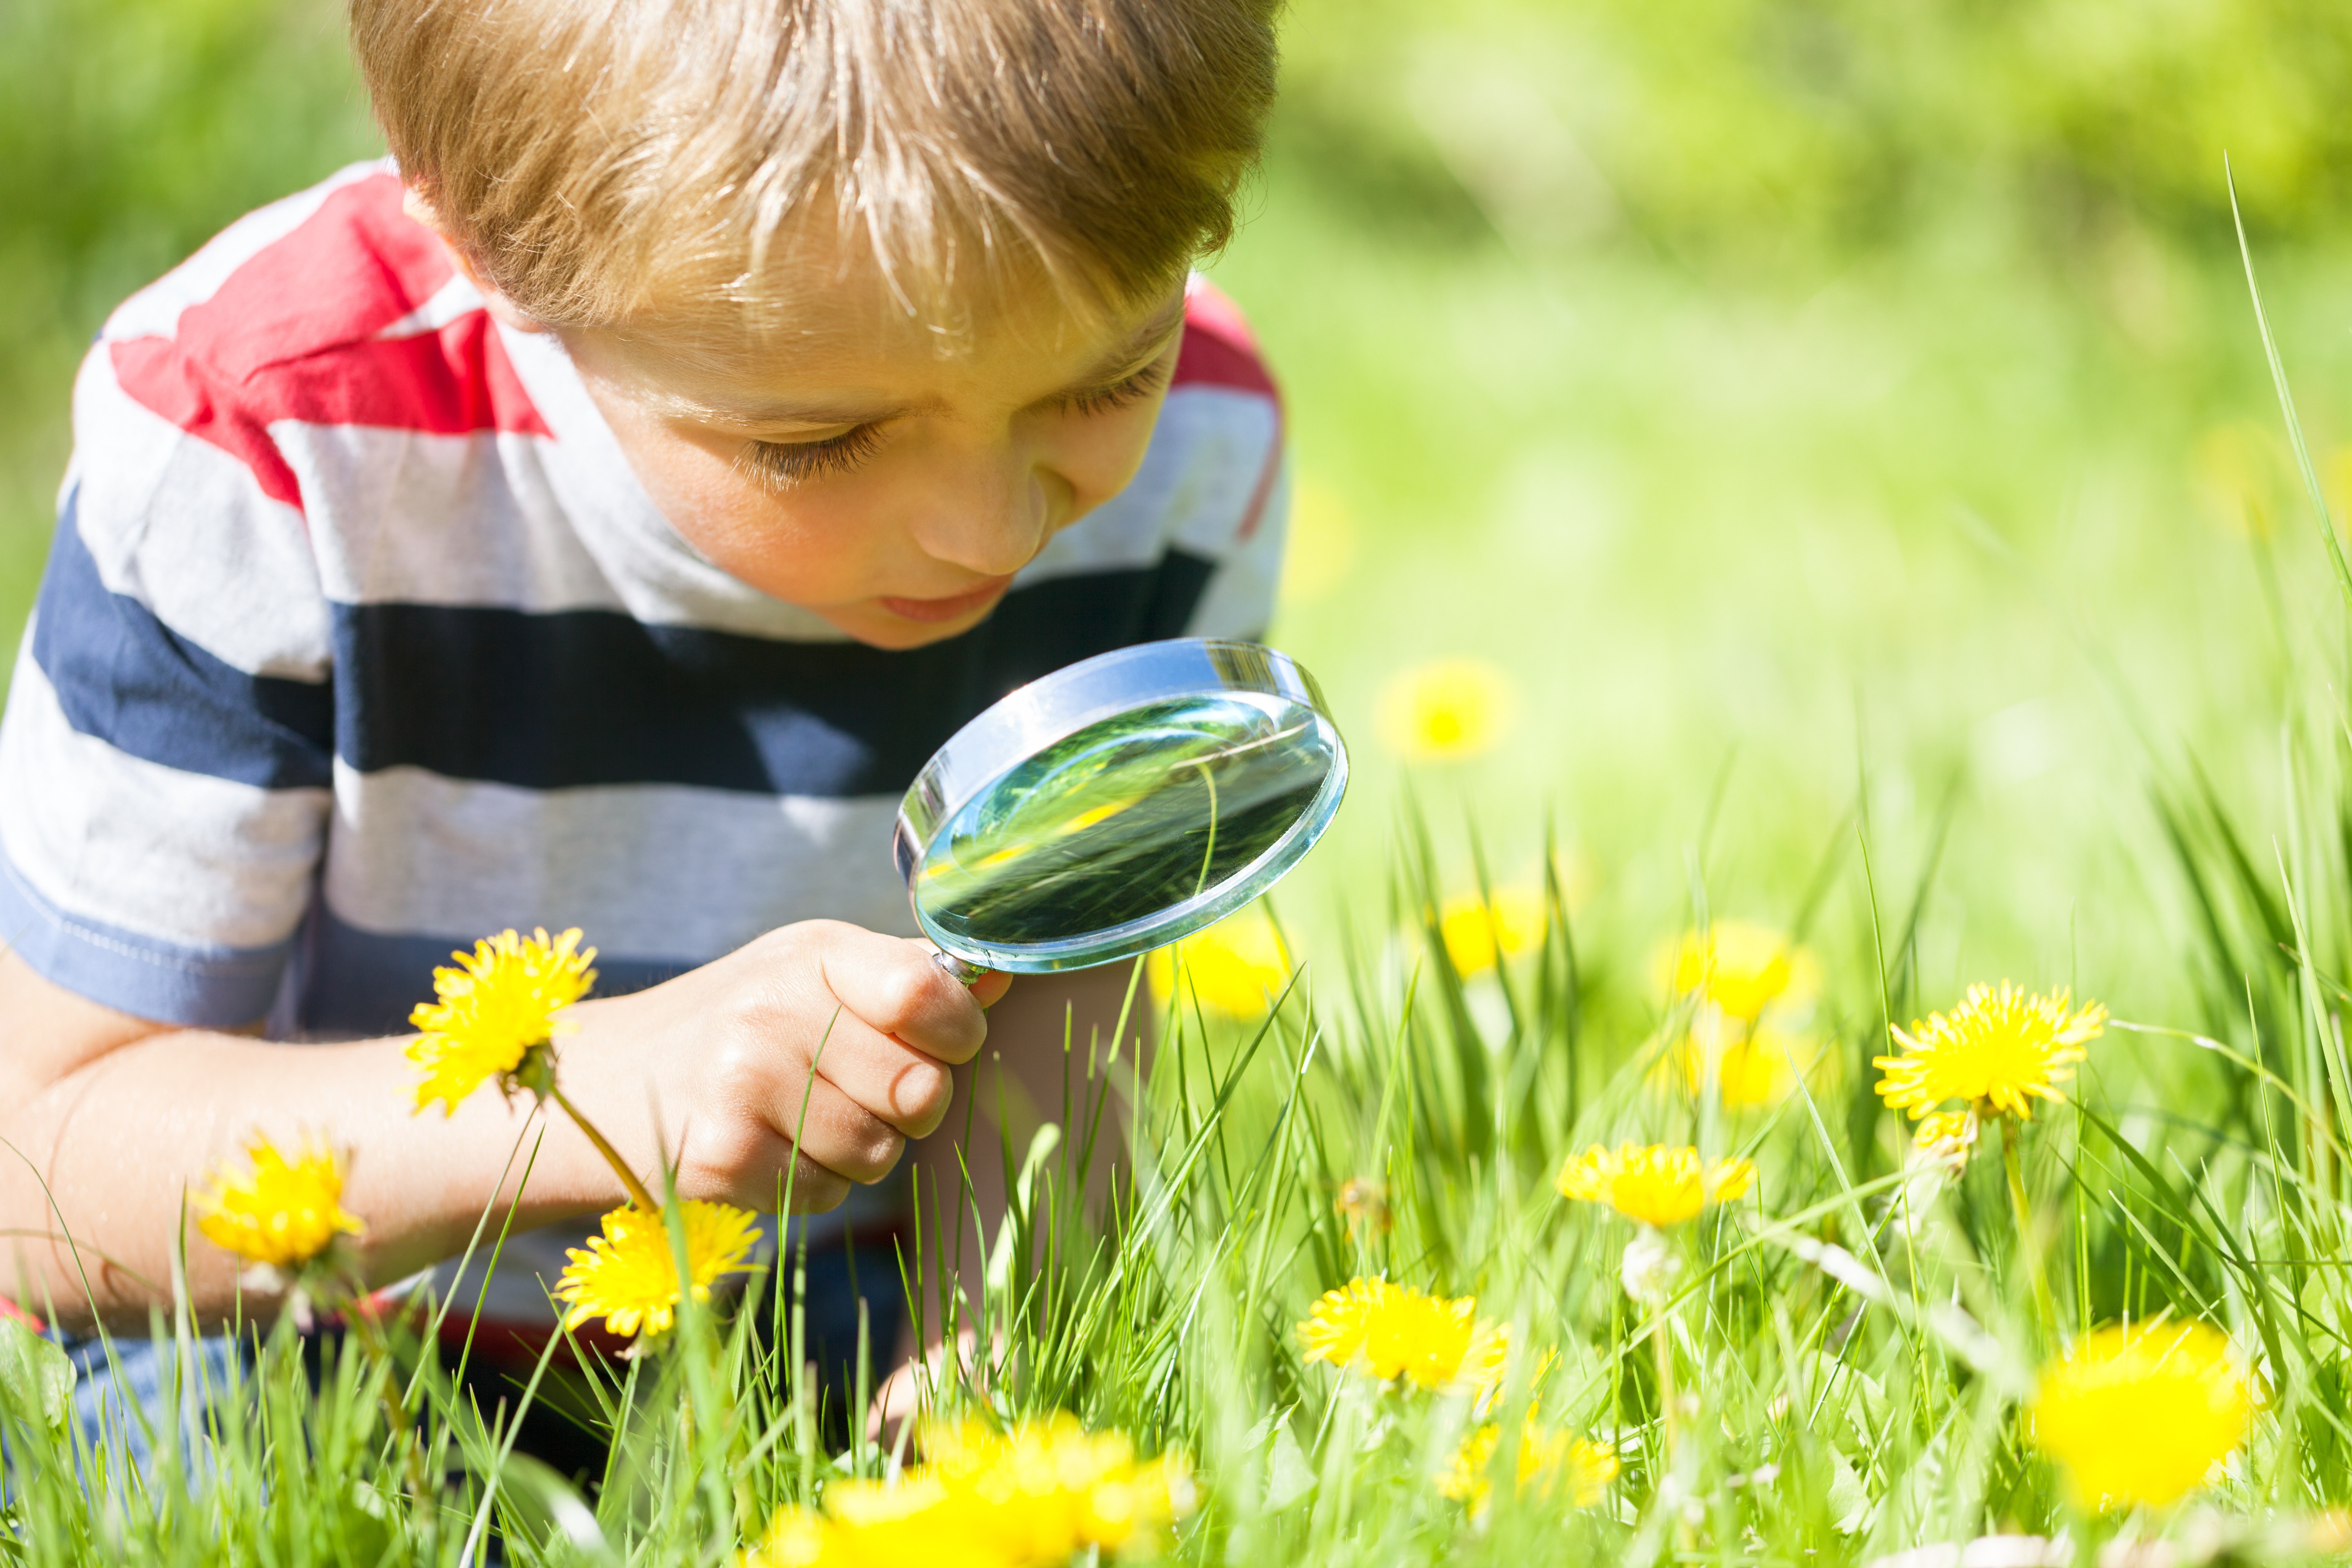 Young boy examines a field of dandelions through a magnifying glass.